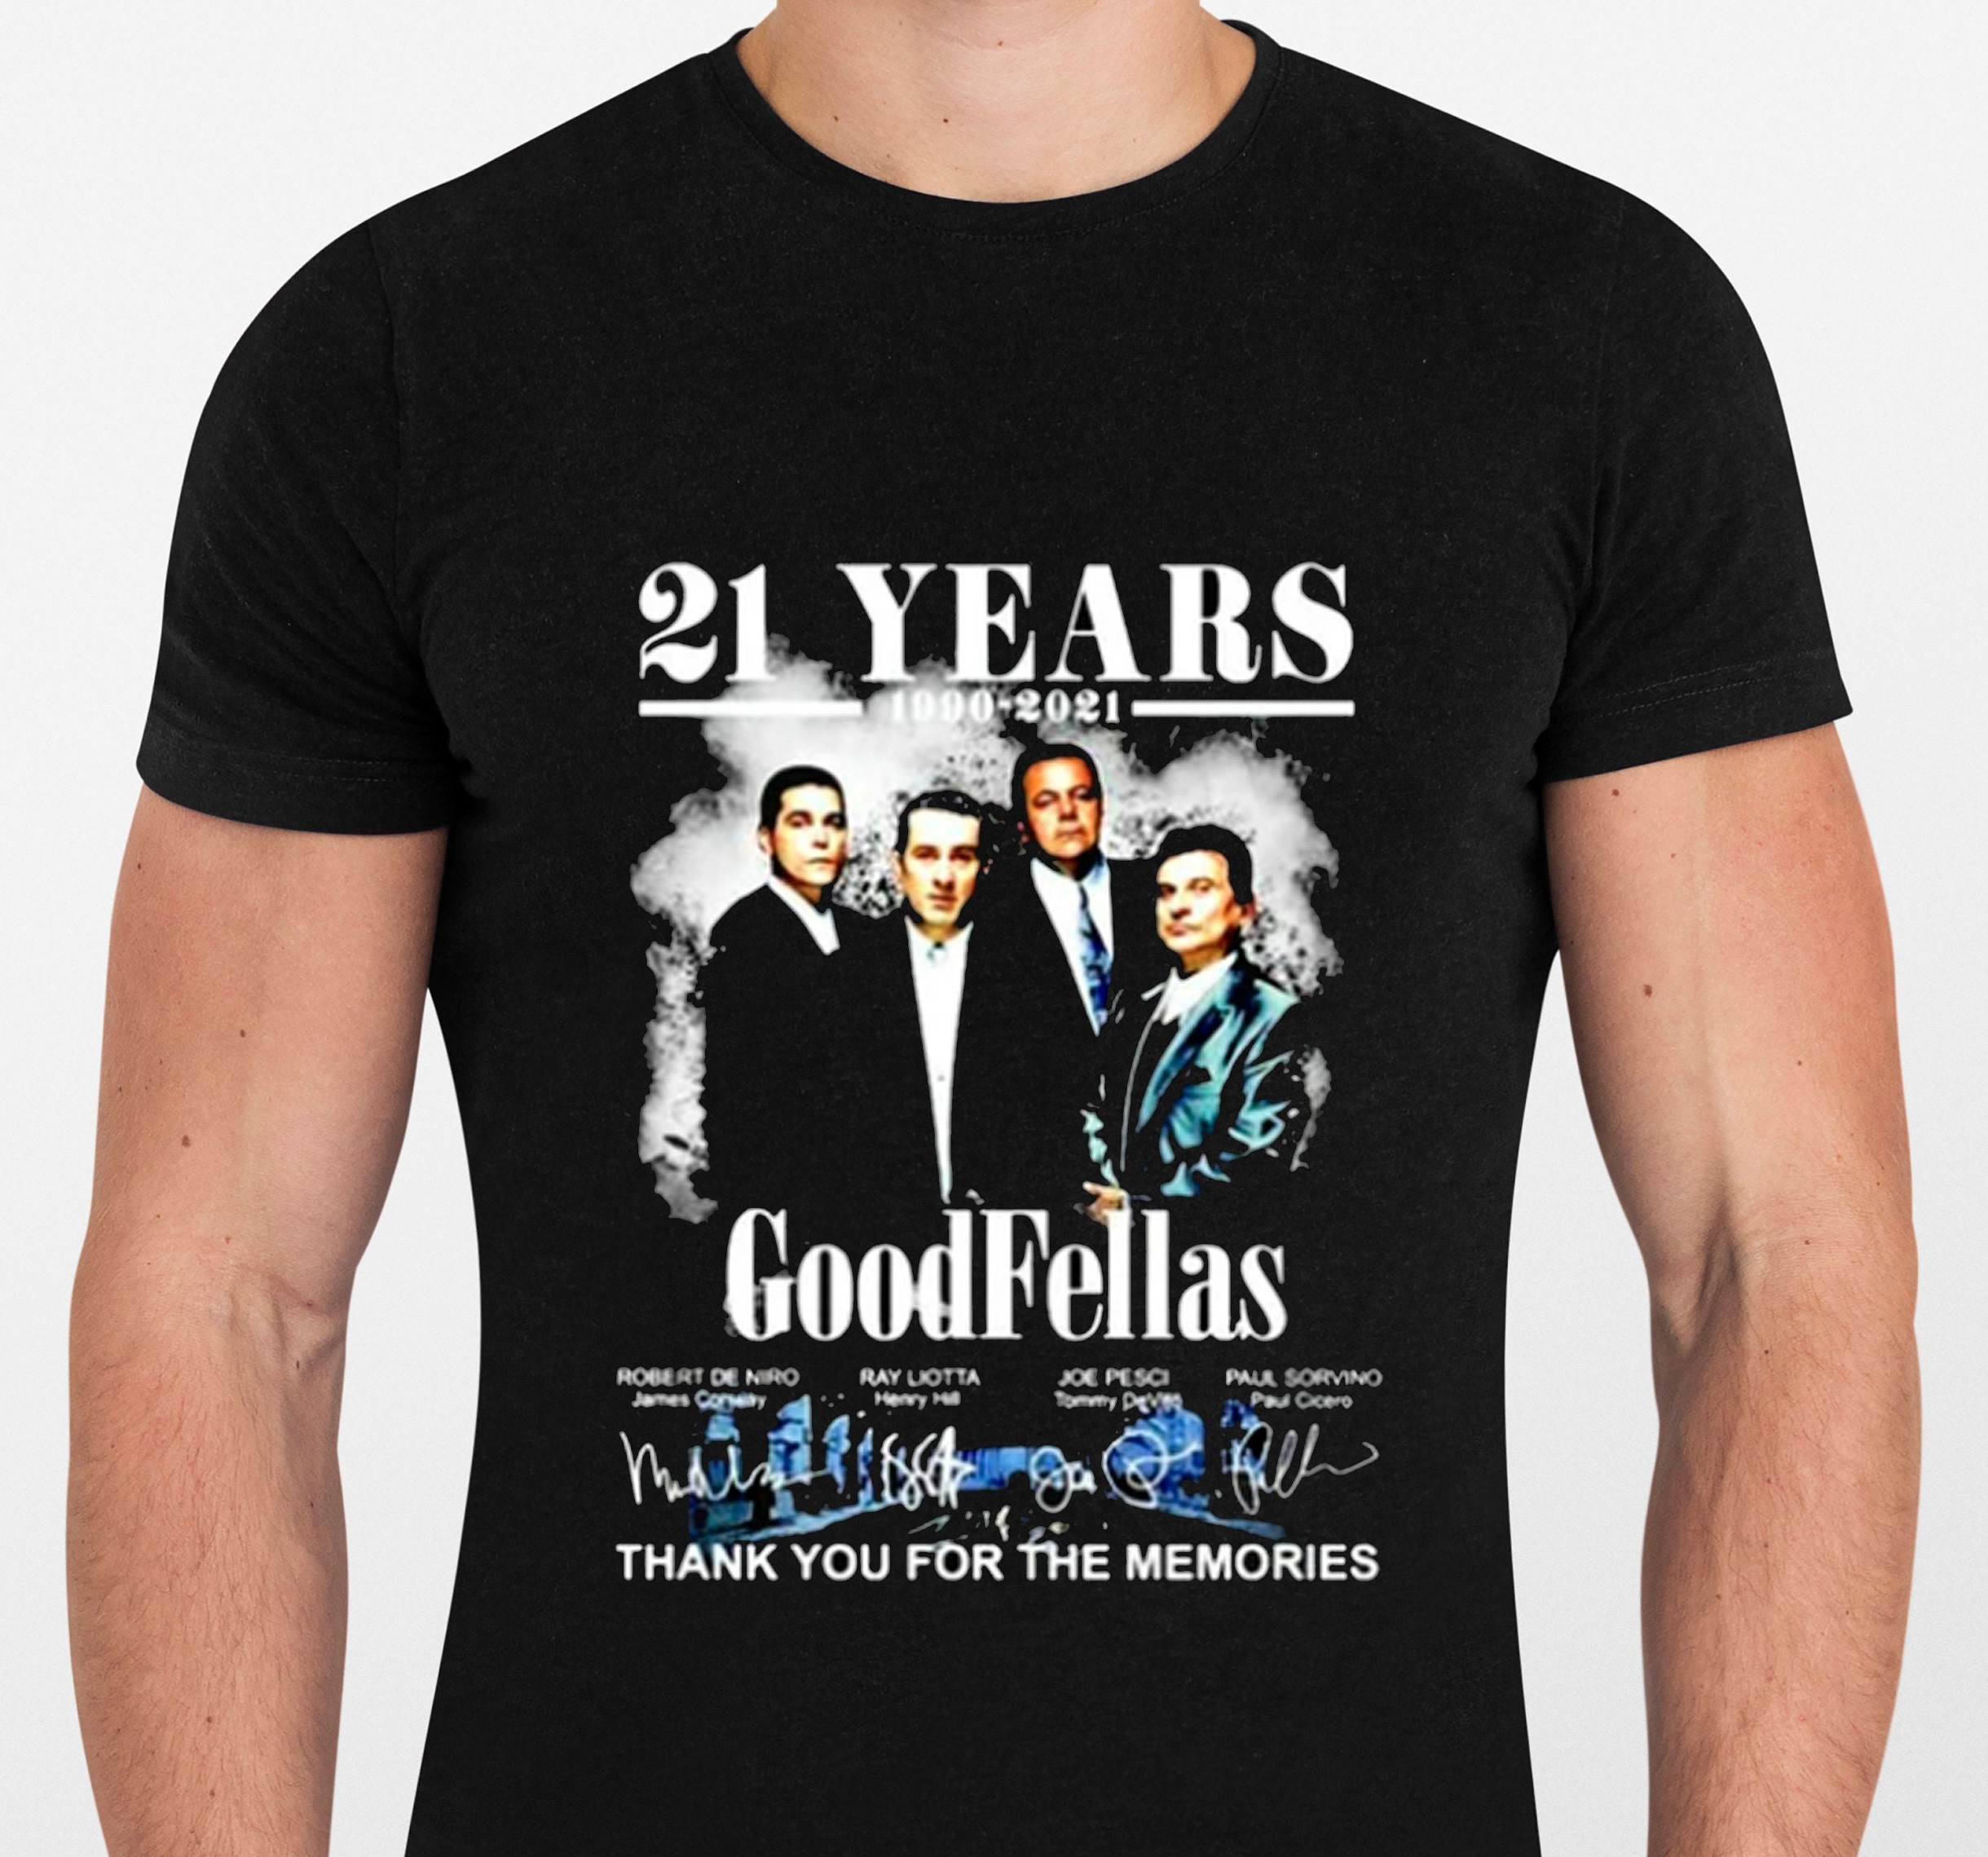 21 Years 1990-2021 Goodfellas Thank You For The Memories Unisex T-Shirt